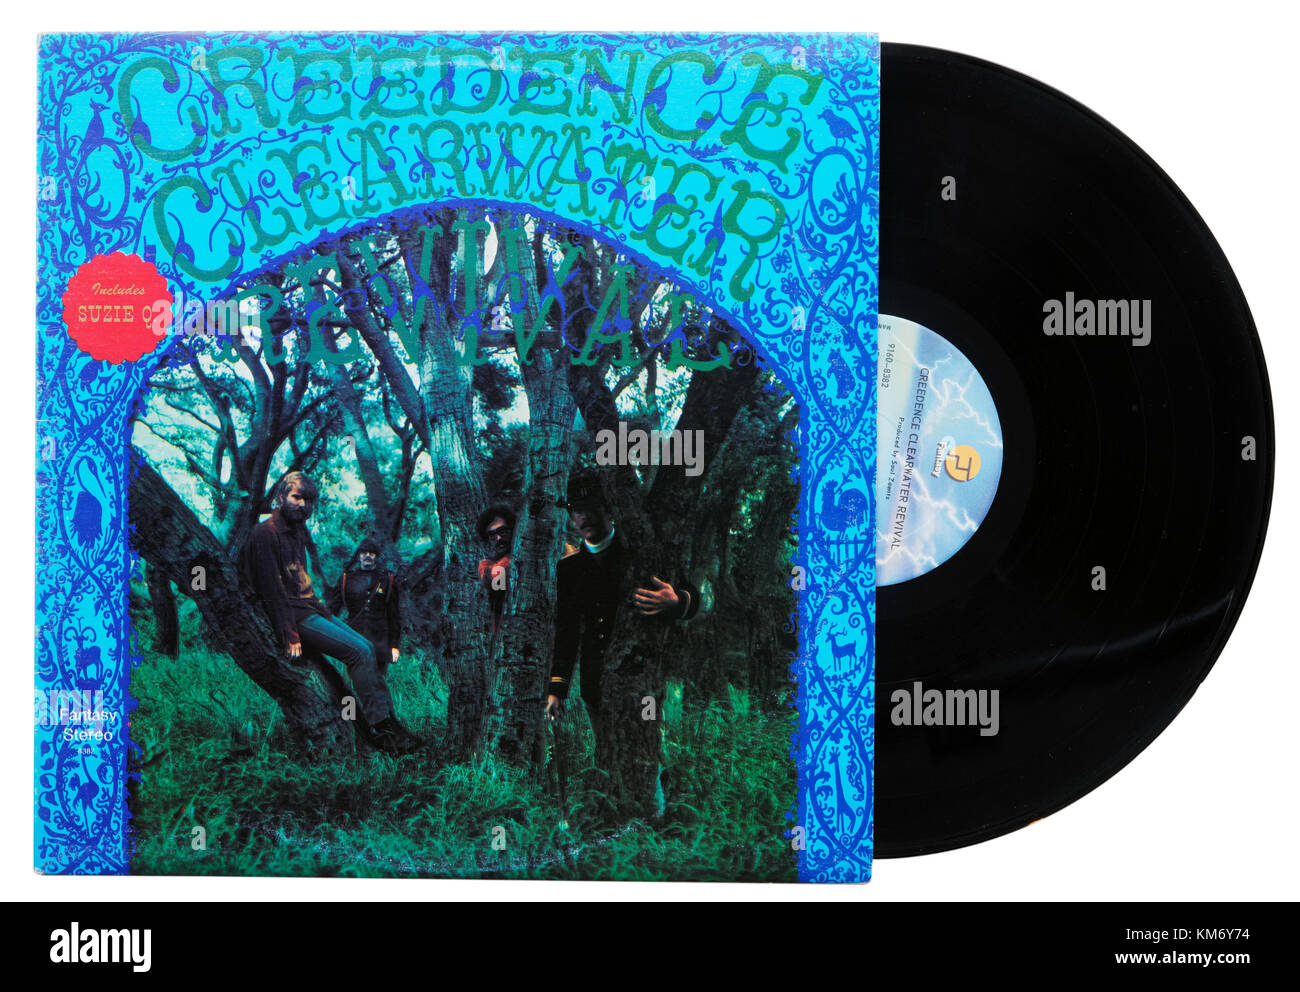 Creedence Clearwater Revival's first album Creedence Clearwater Revival Stock Photo